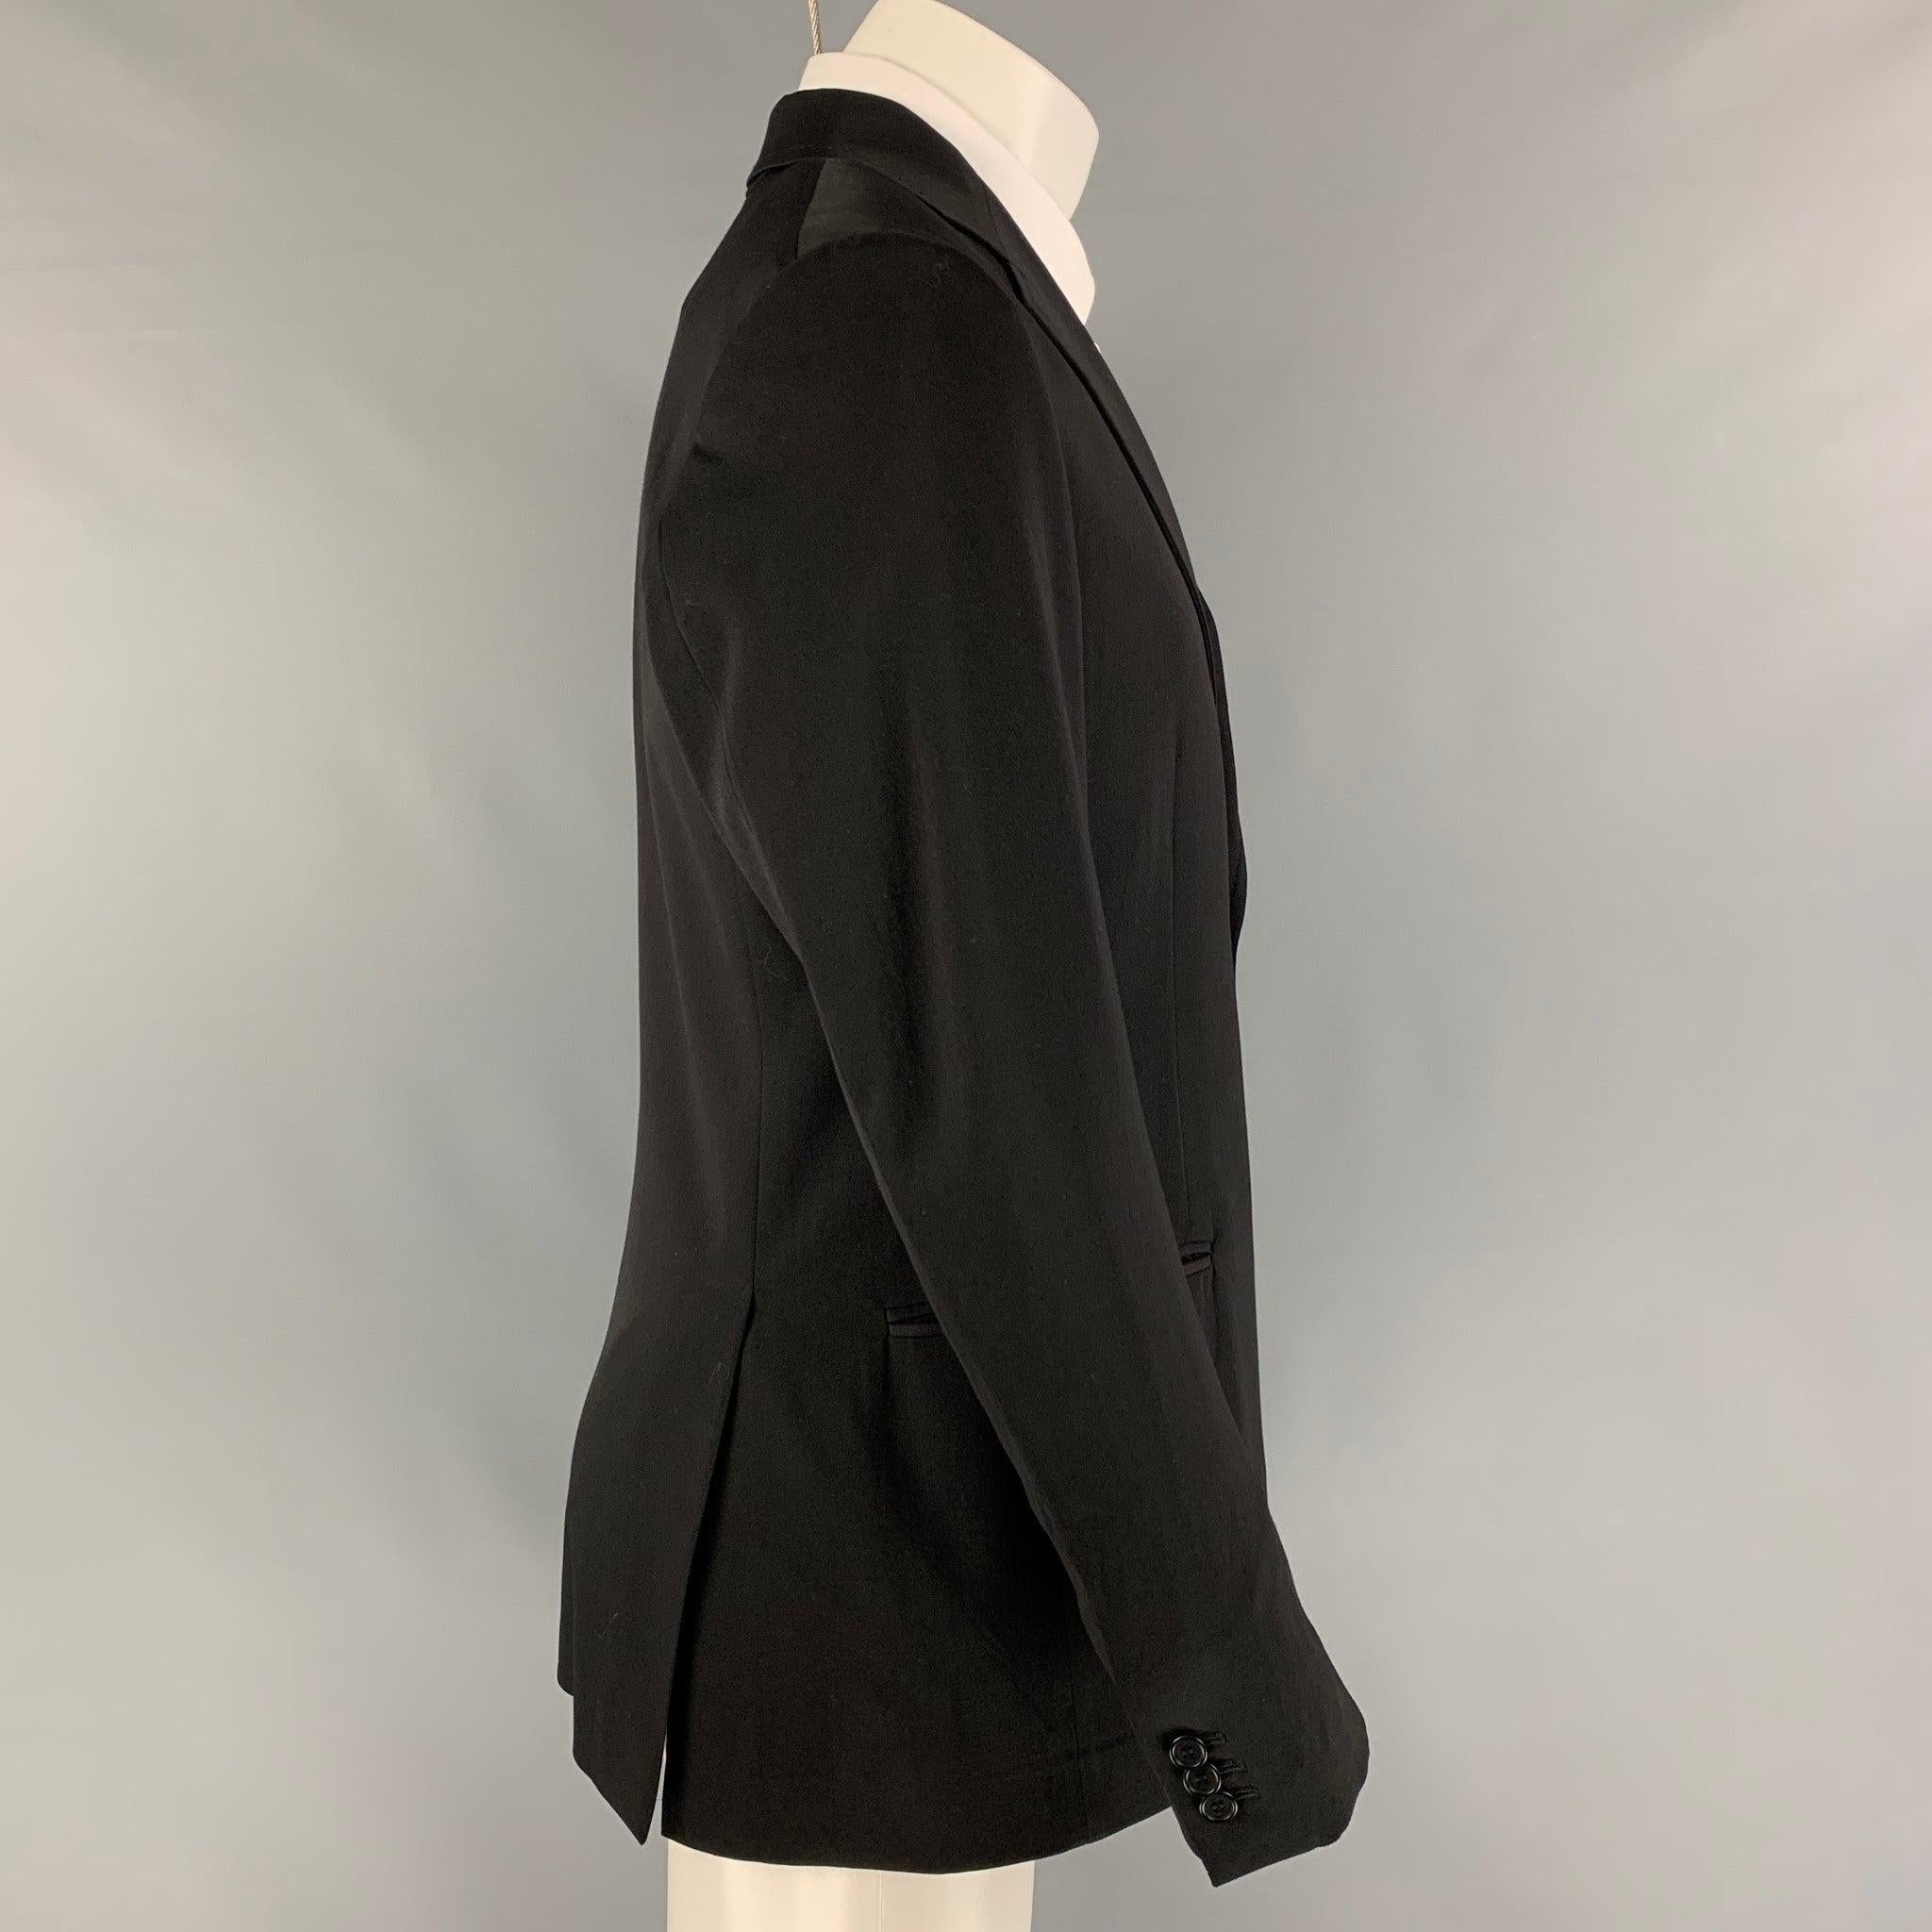 FENDI sport coat comes in a black wool with a full liner featuring a notch lapel, slit pockets, double back vent, and a double button closure. Made in Italy.
Very Good
Pre-Owned Condition. 

Marked:   50 

Measurements: 
 
Shoulder: 17.5 inches 